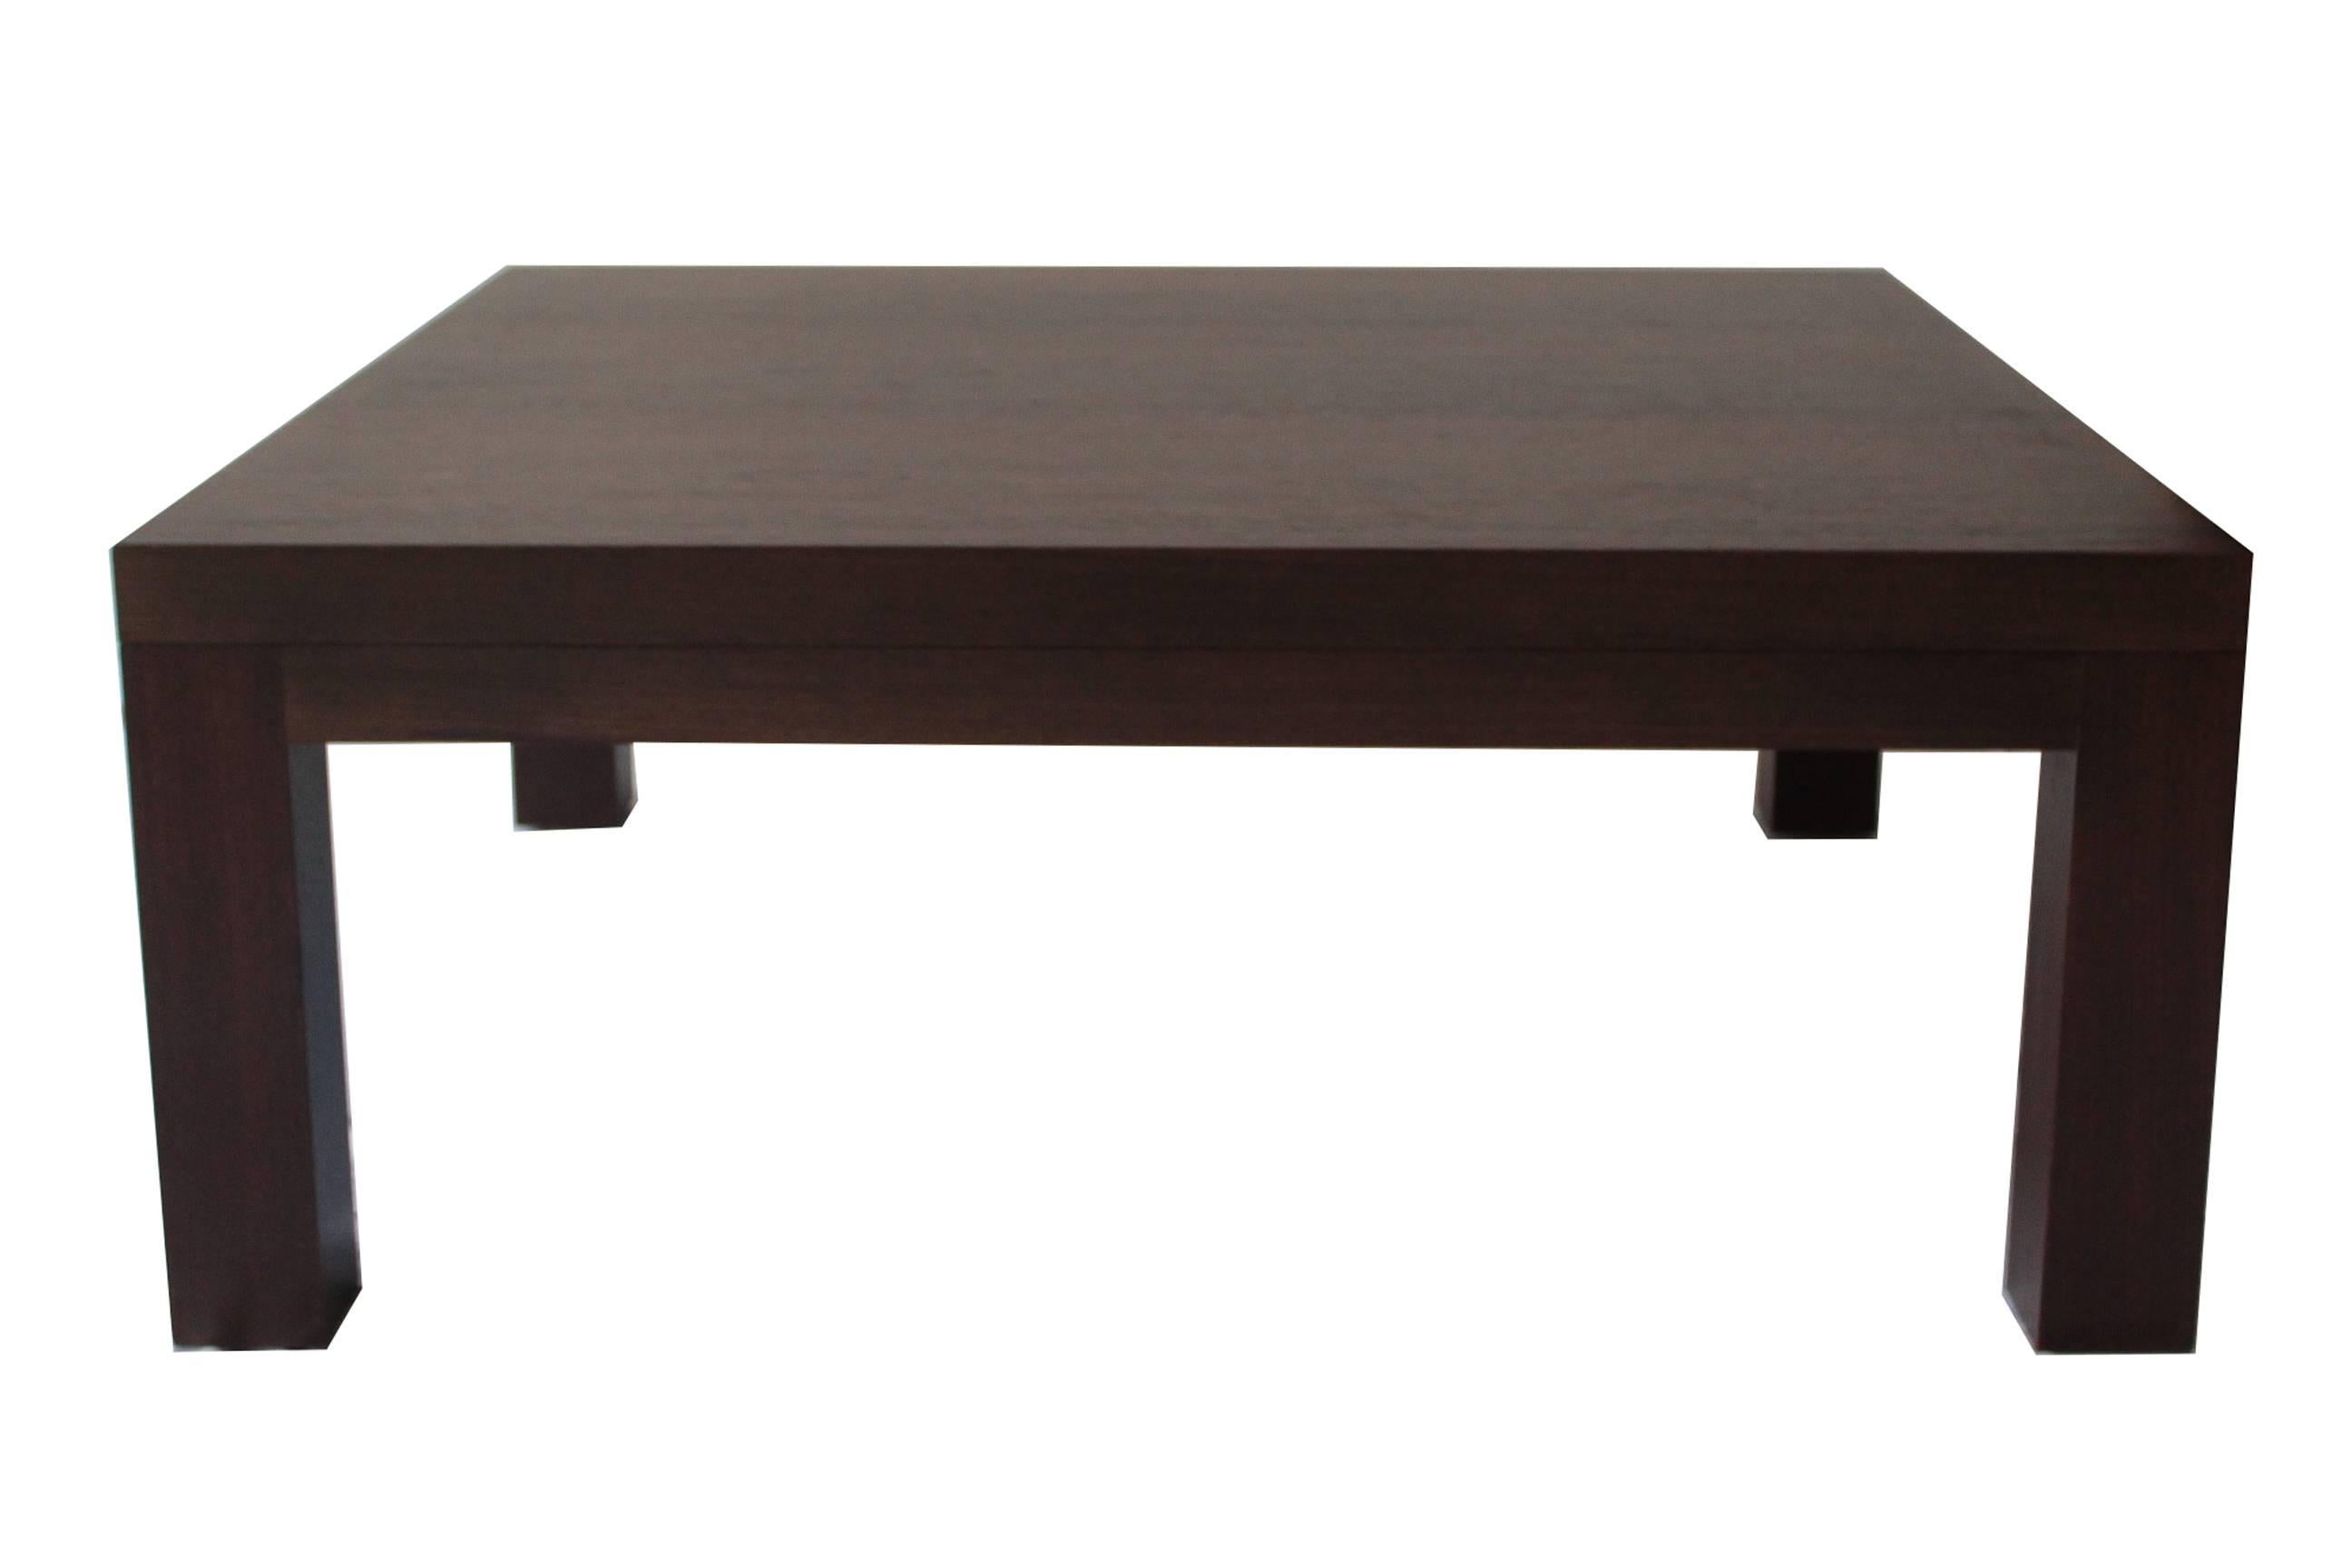 Custom made coffee table by architect Spencer Fung. Coffee table is made from rare, tropical hardwood African Wenge Wood. 
